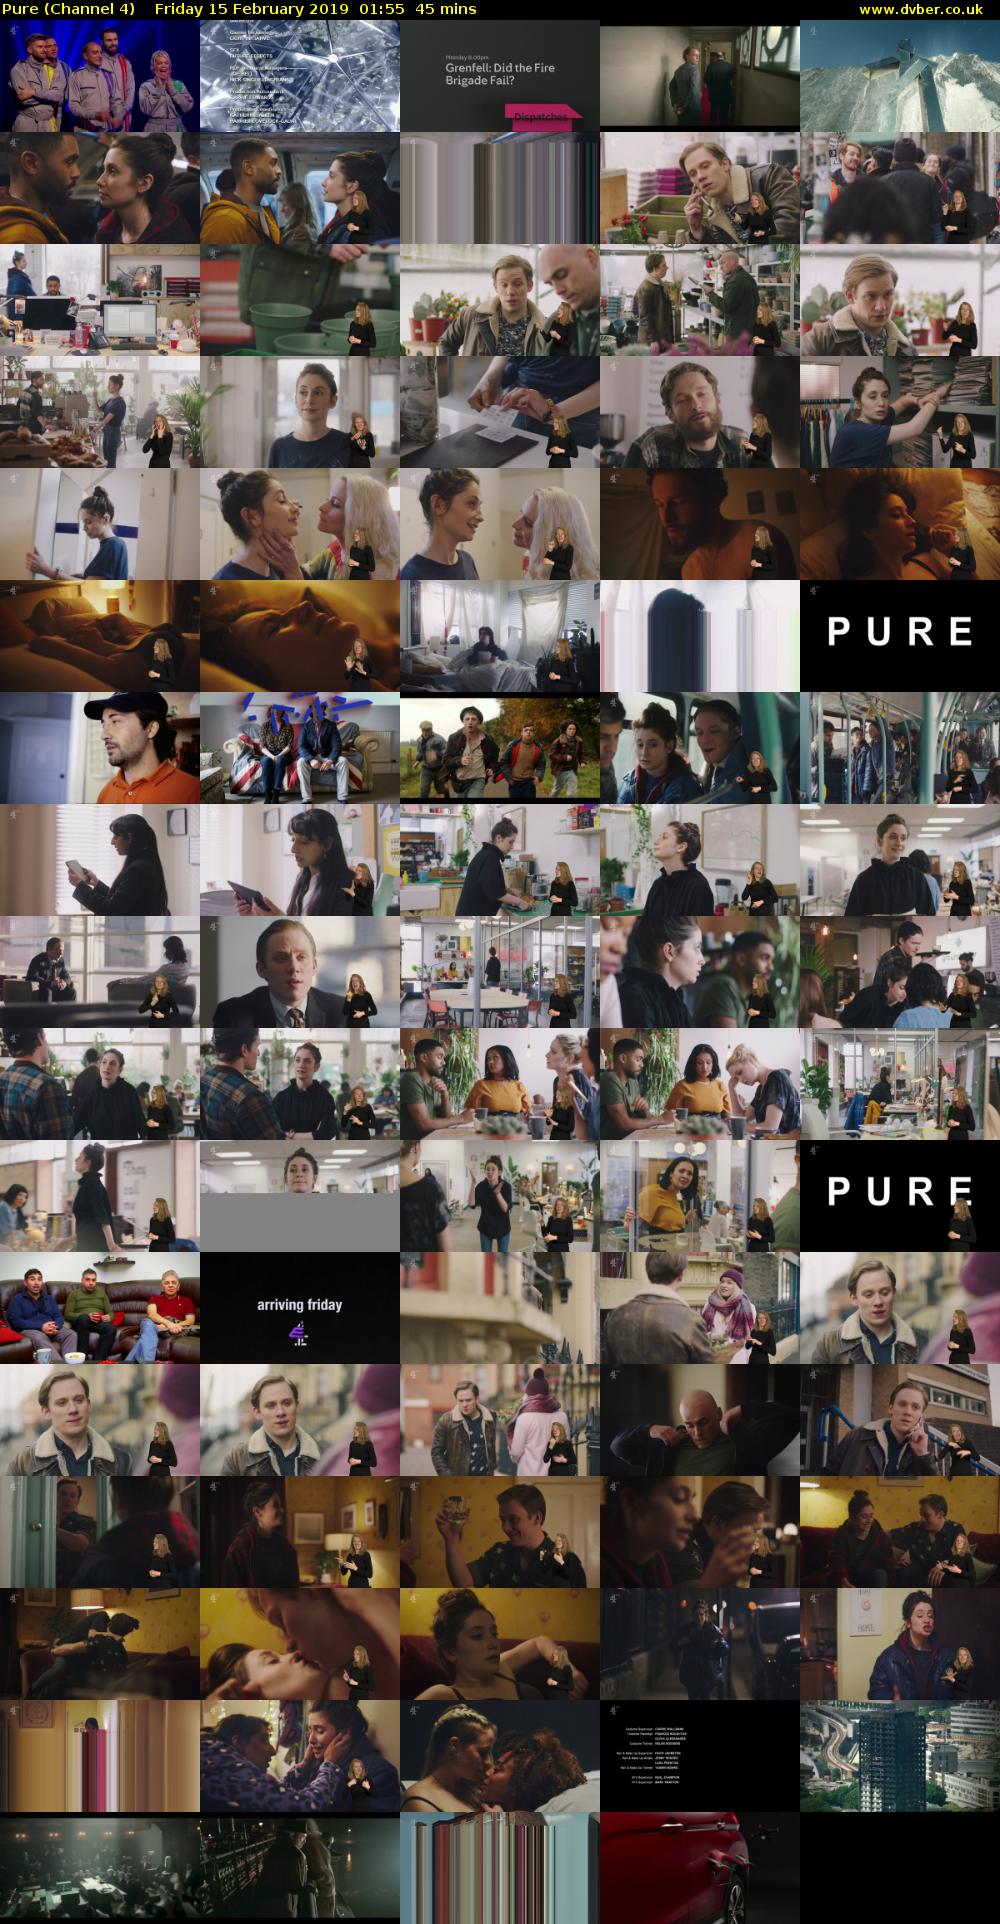 Pure (Channel 4) Friday 15 February 2019 01:55 - 02:40